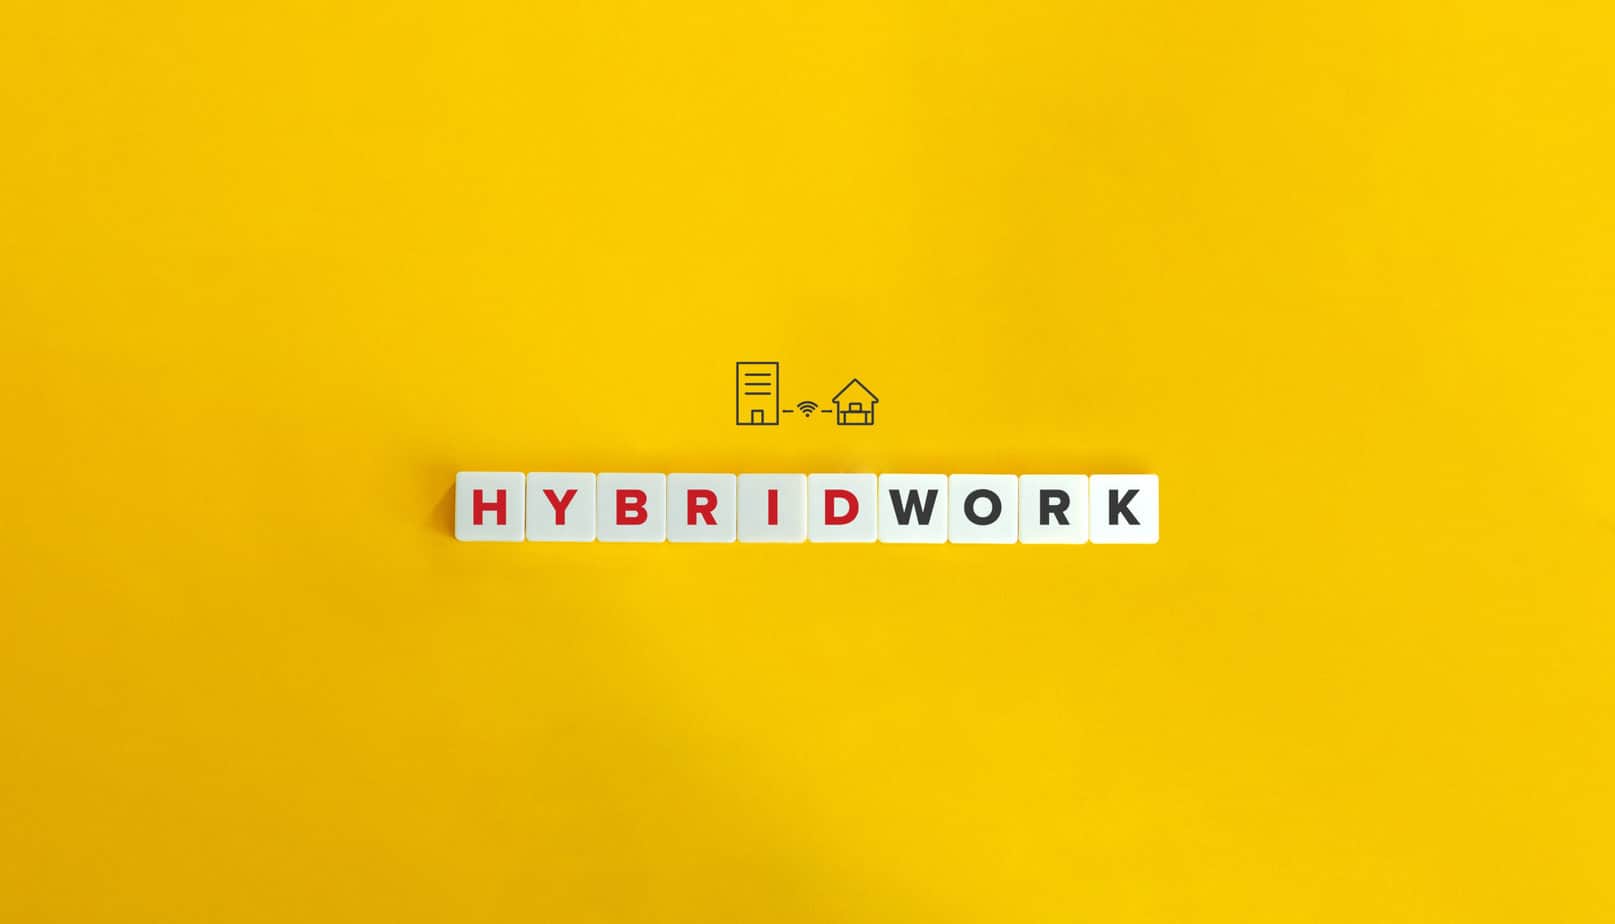 How To Successfully Transition To The Hybrid Work Model